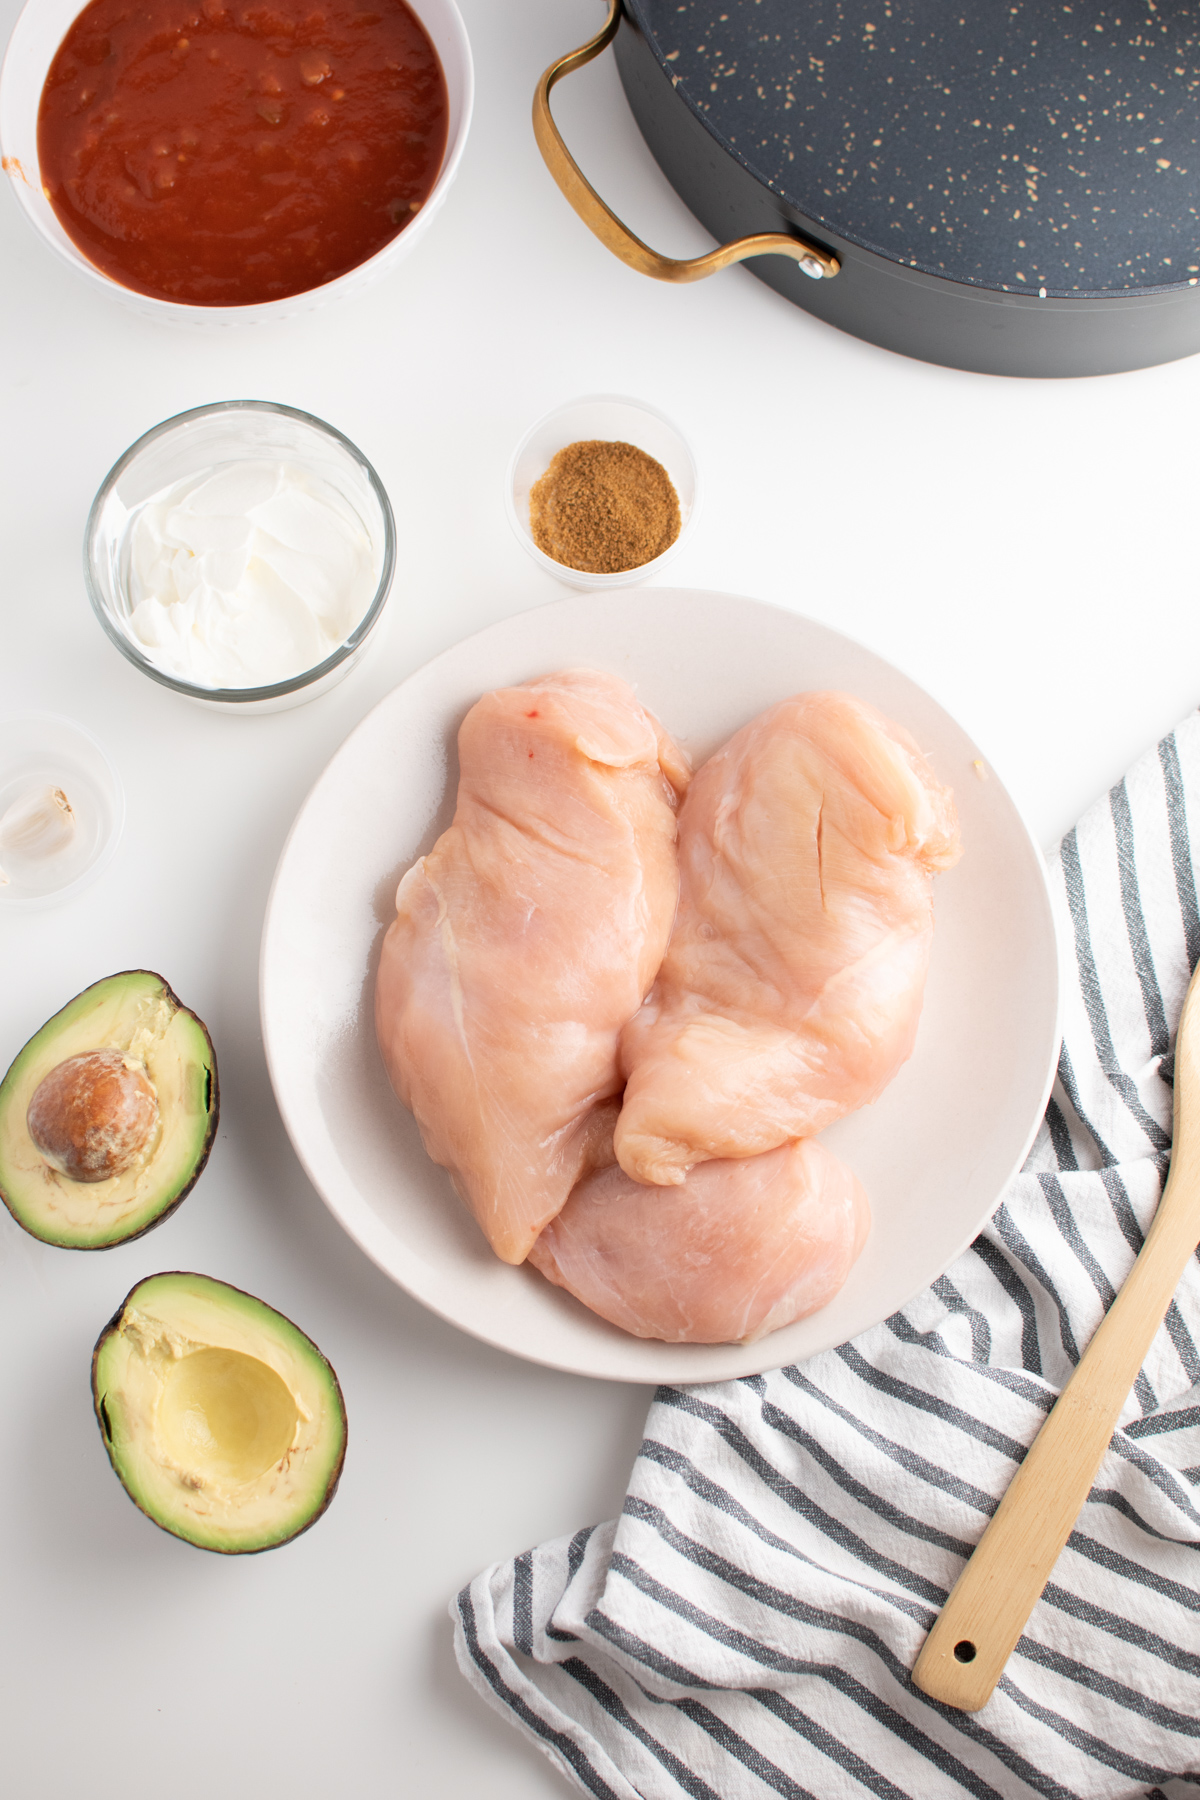 Picante chicken ingredients including raw chicken breast, avocado and seasonings by skillet.